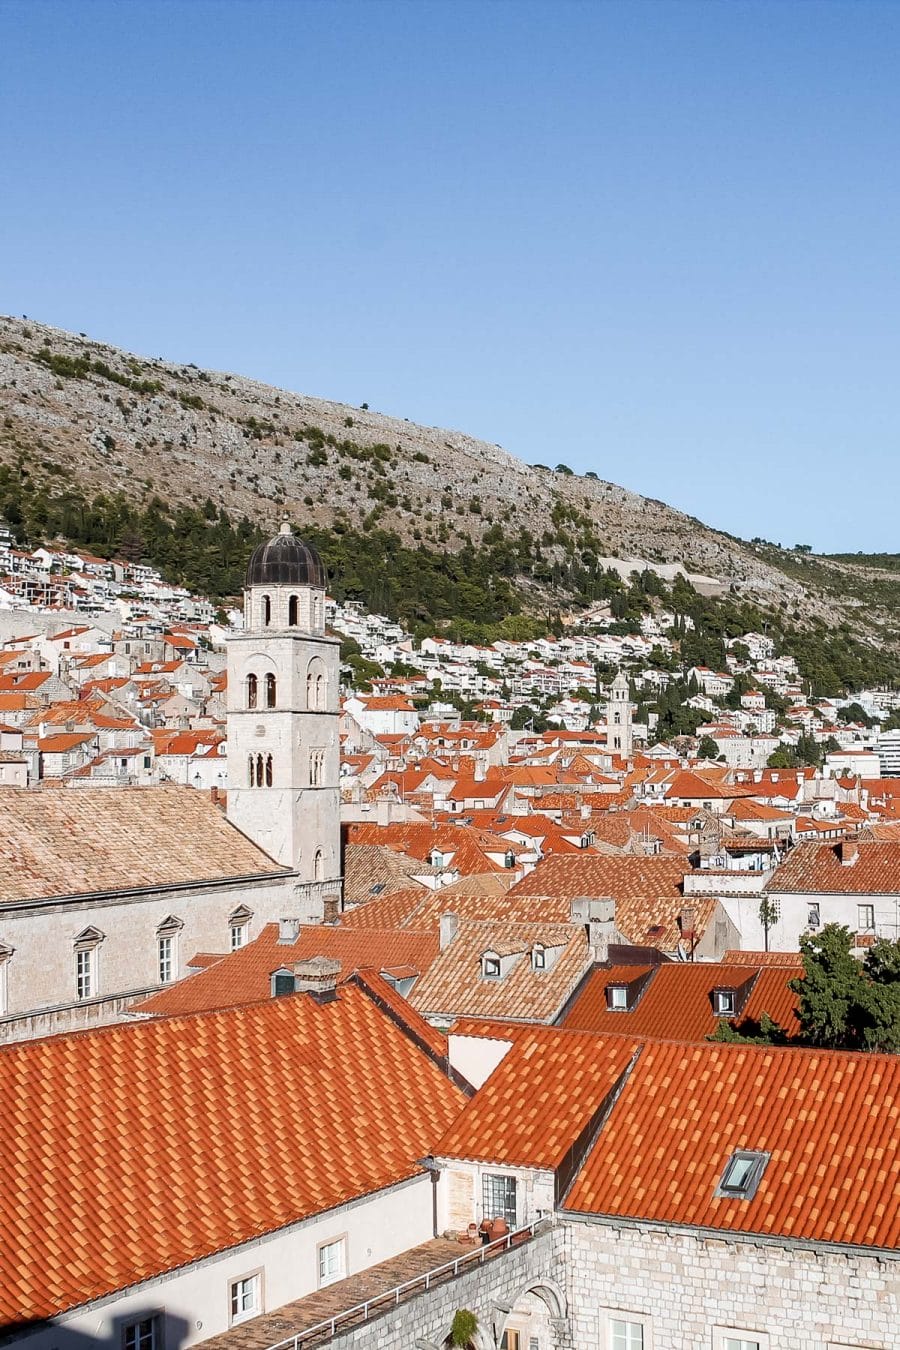 View of the orange roofs and a church in Dubrovnik, Croatia